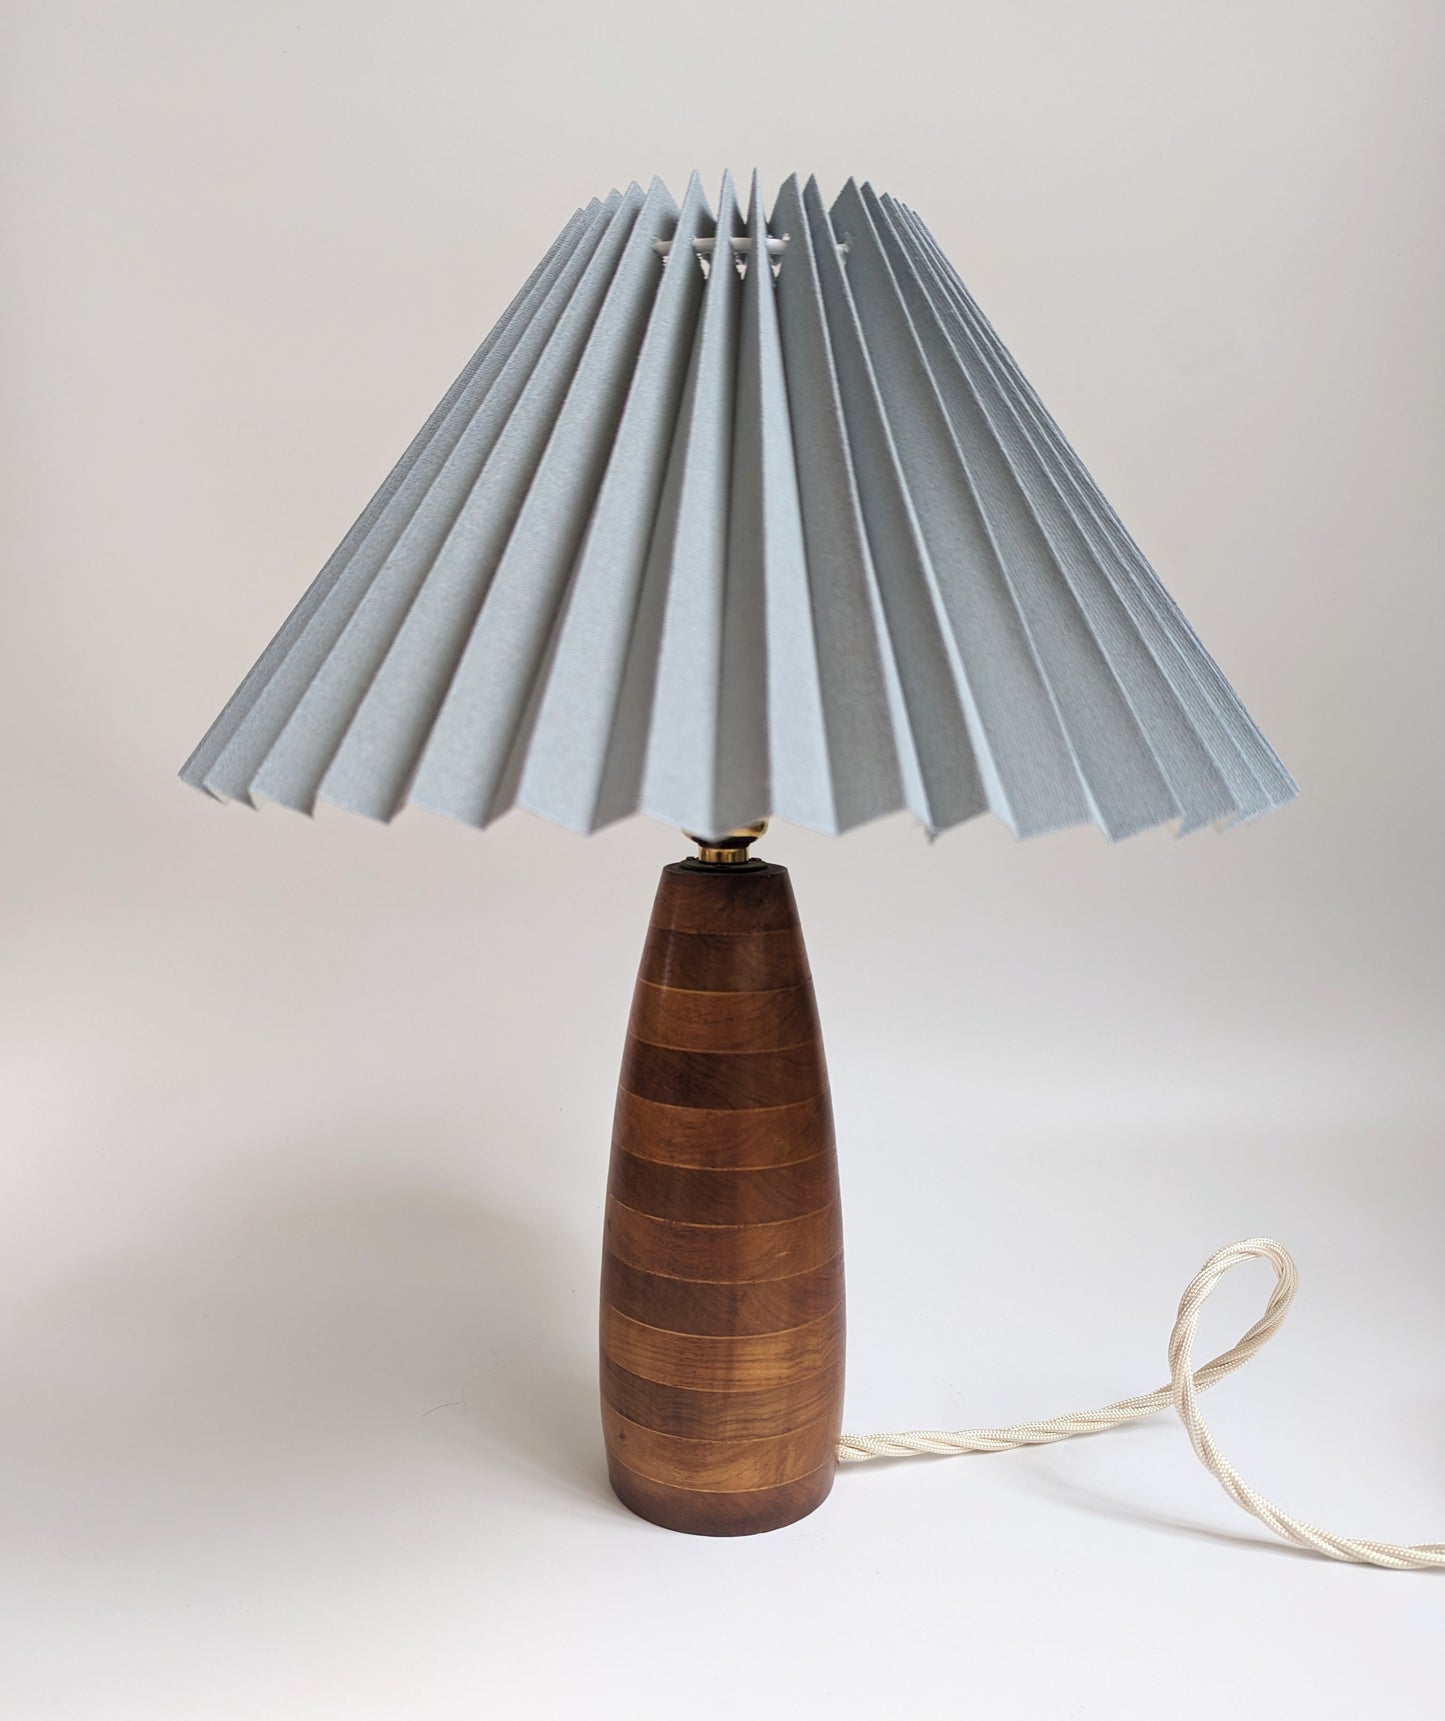 Wooden Striped Lamp